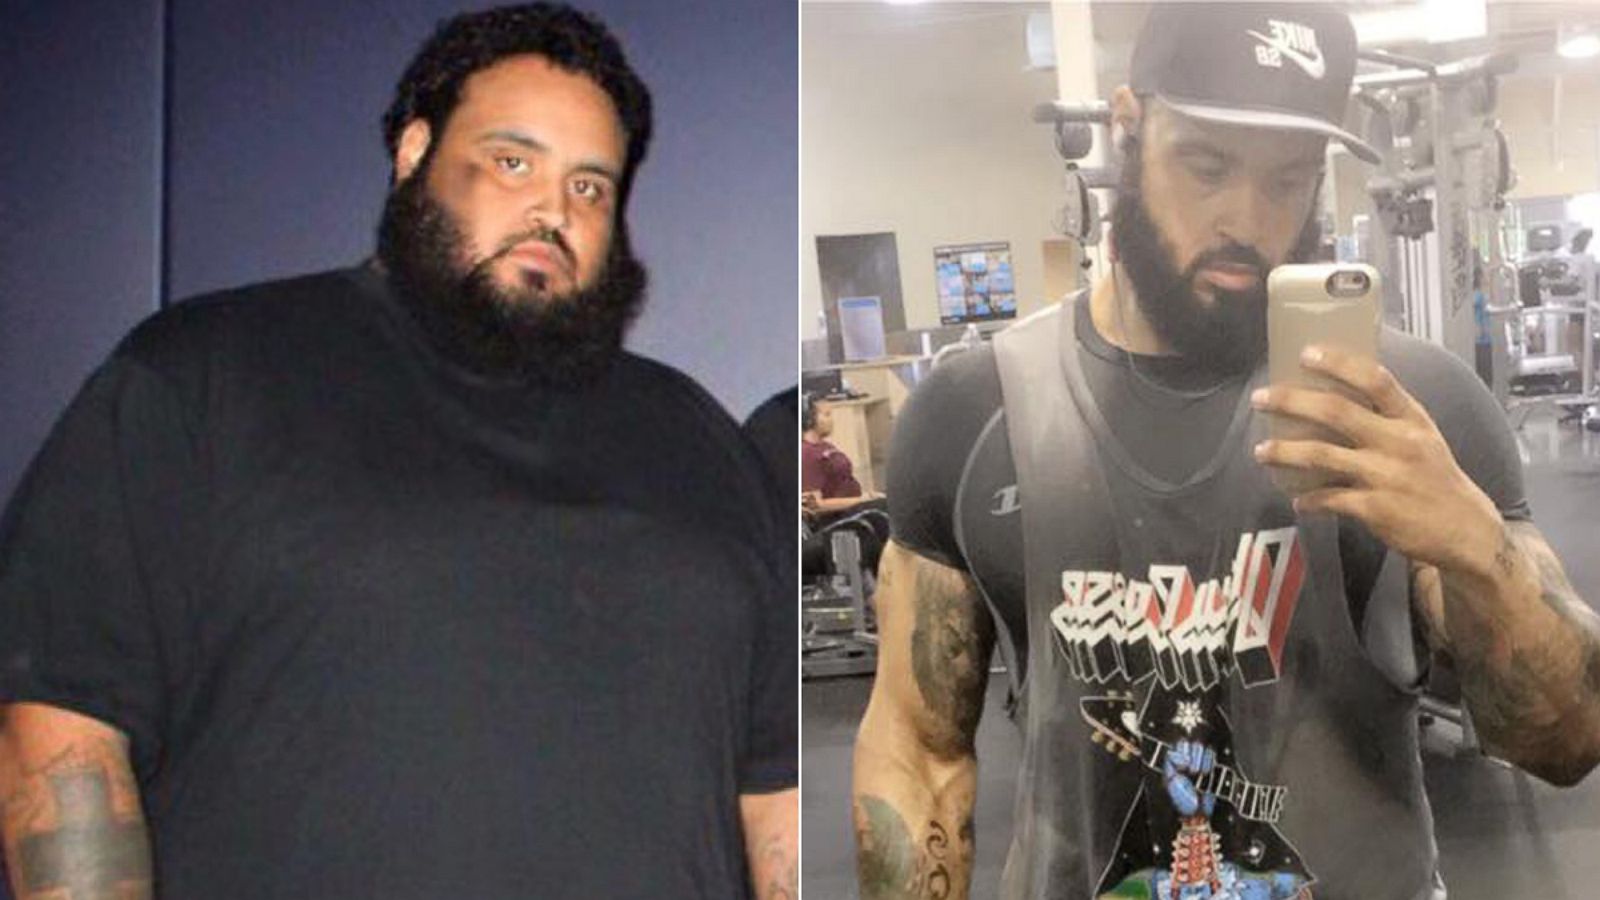 7 Packers who lost weight, packed on pounds or otherwise got in